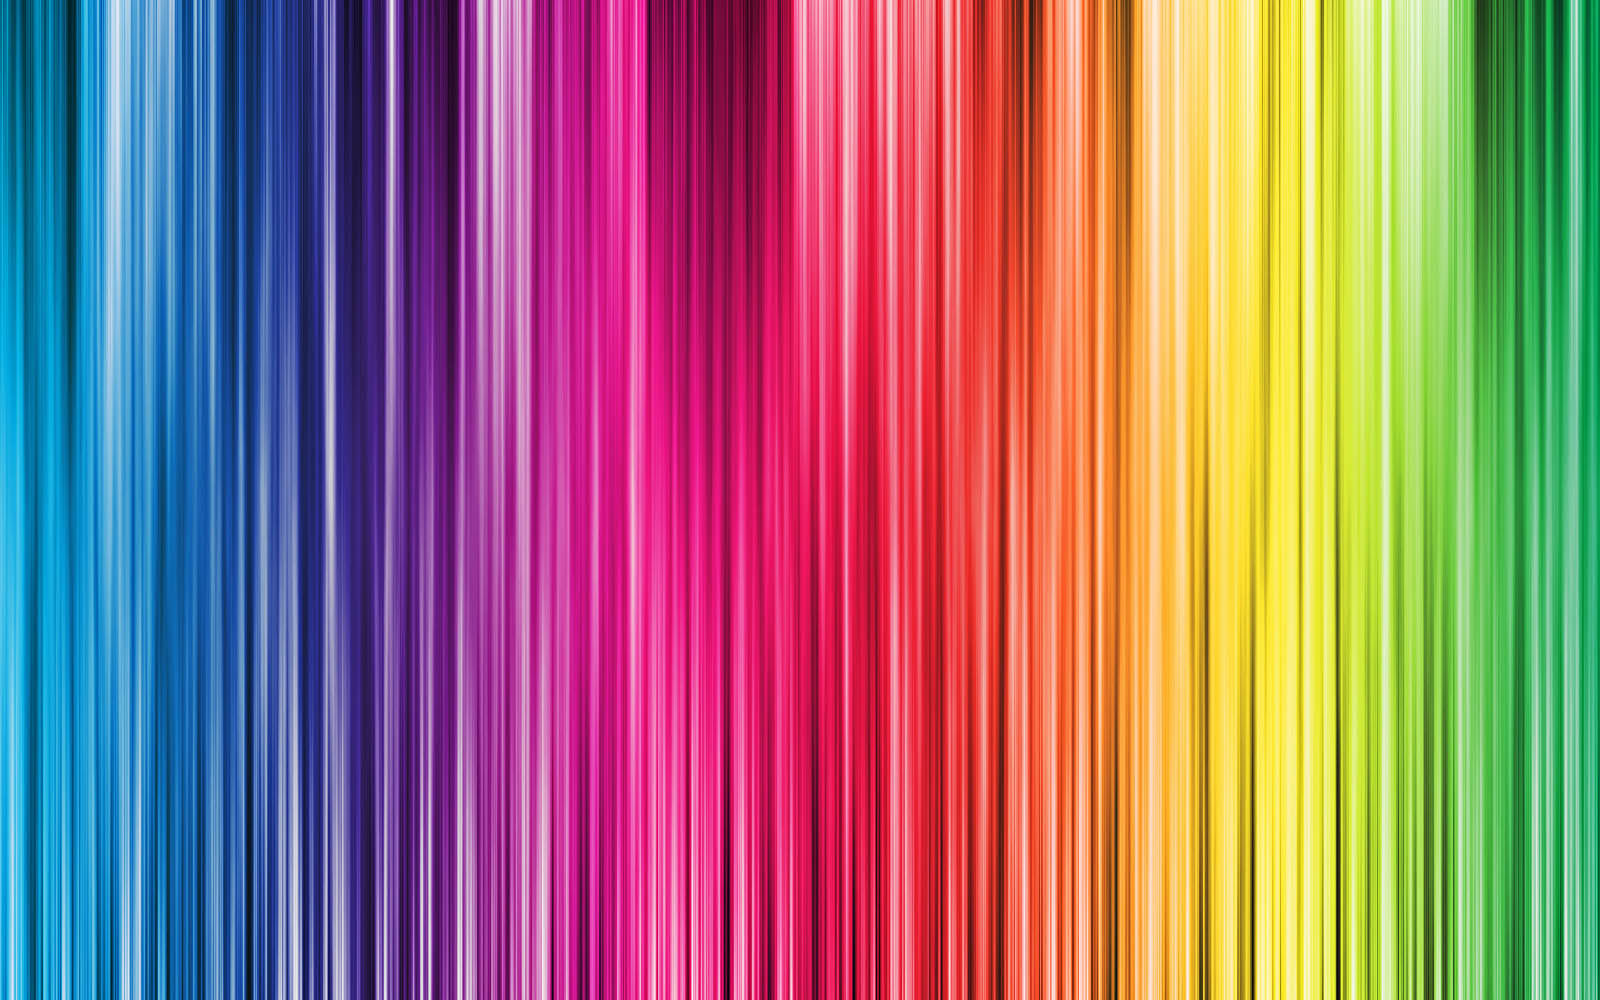 Wallpapers Colorful Lines Wallpapers HD Wallpapers Download Free Map Images Wallpaper [wallpaper376.blogspot.com]